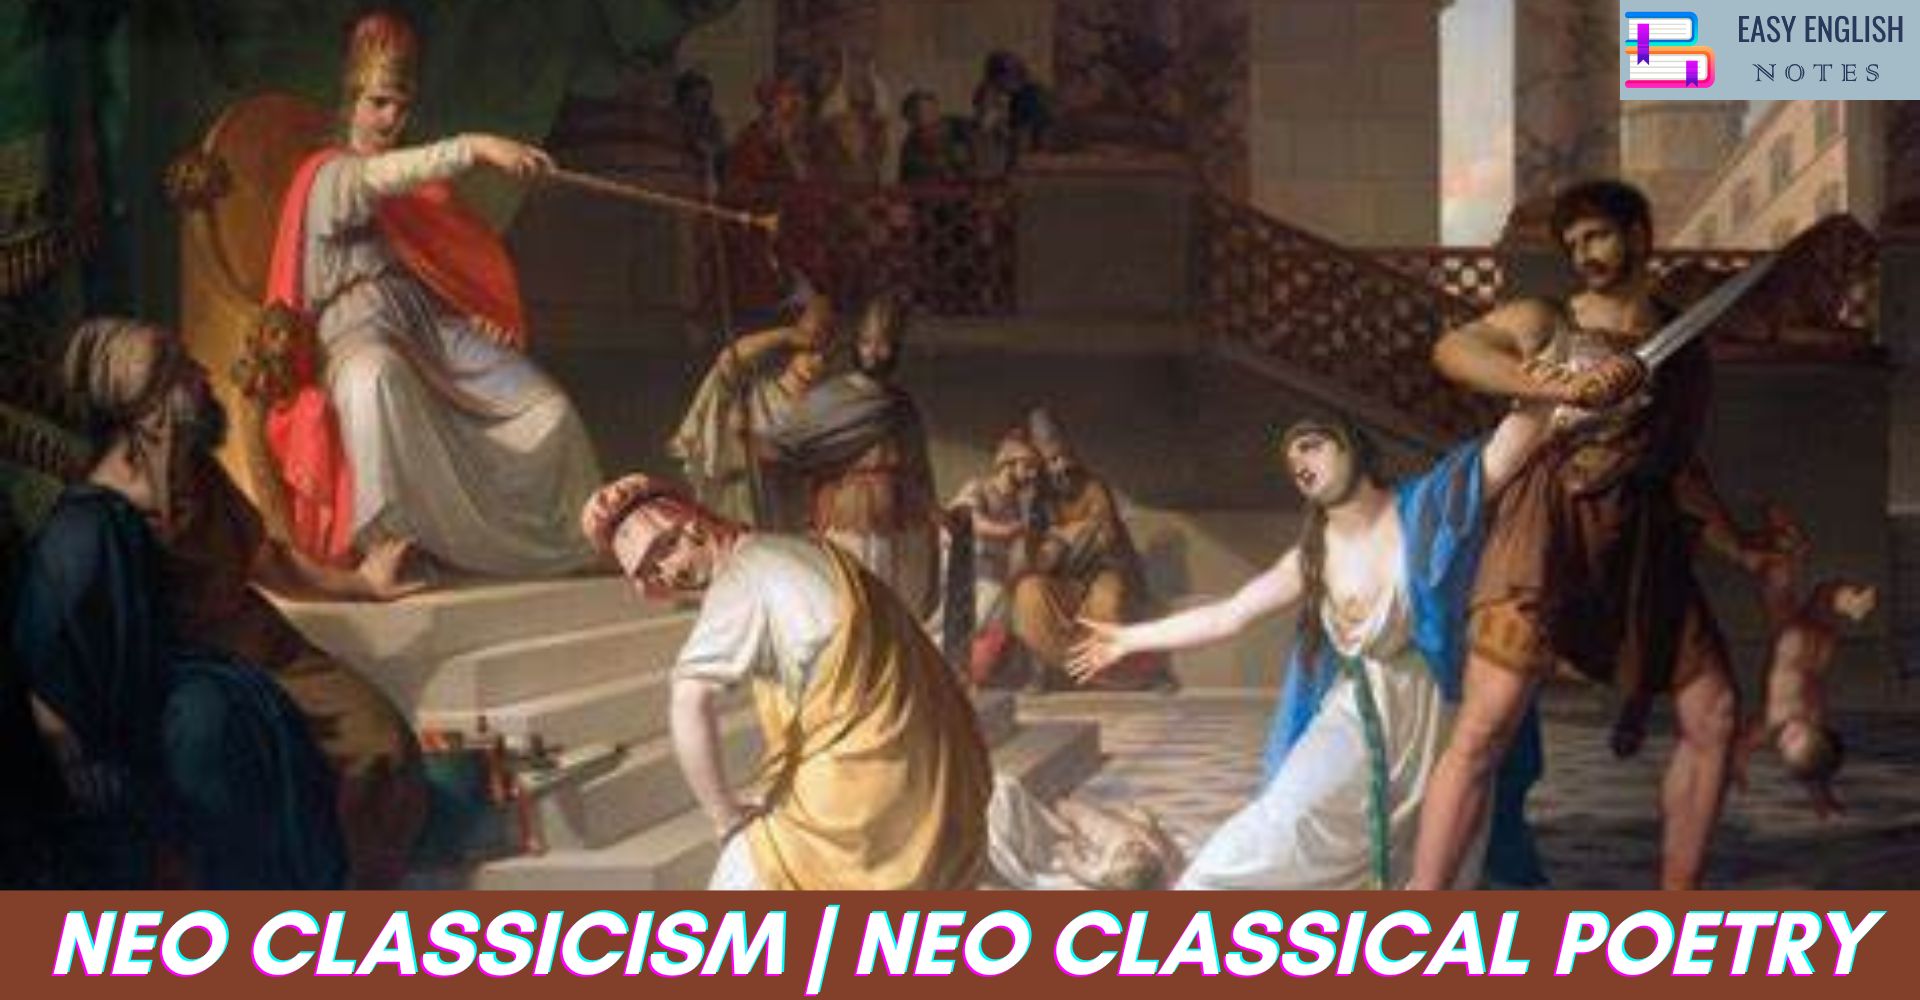 The Classical School of Poetry | Neo Classicism | Neo Classical Poetry